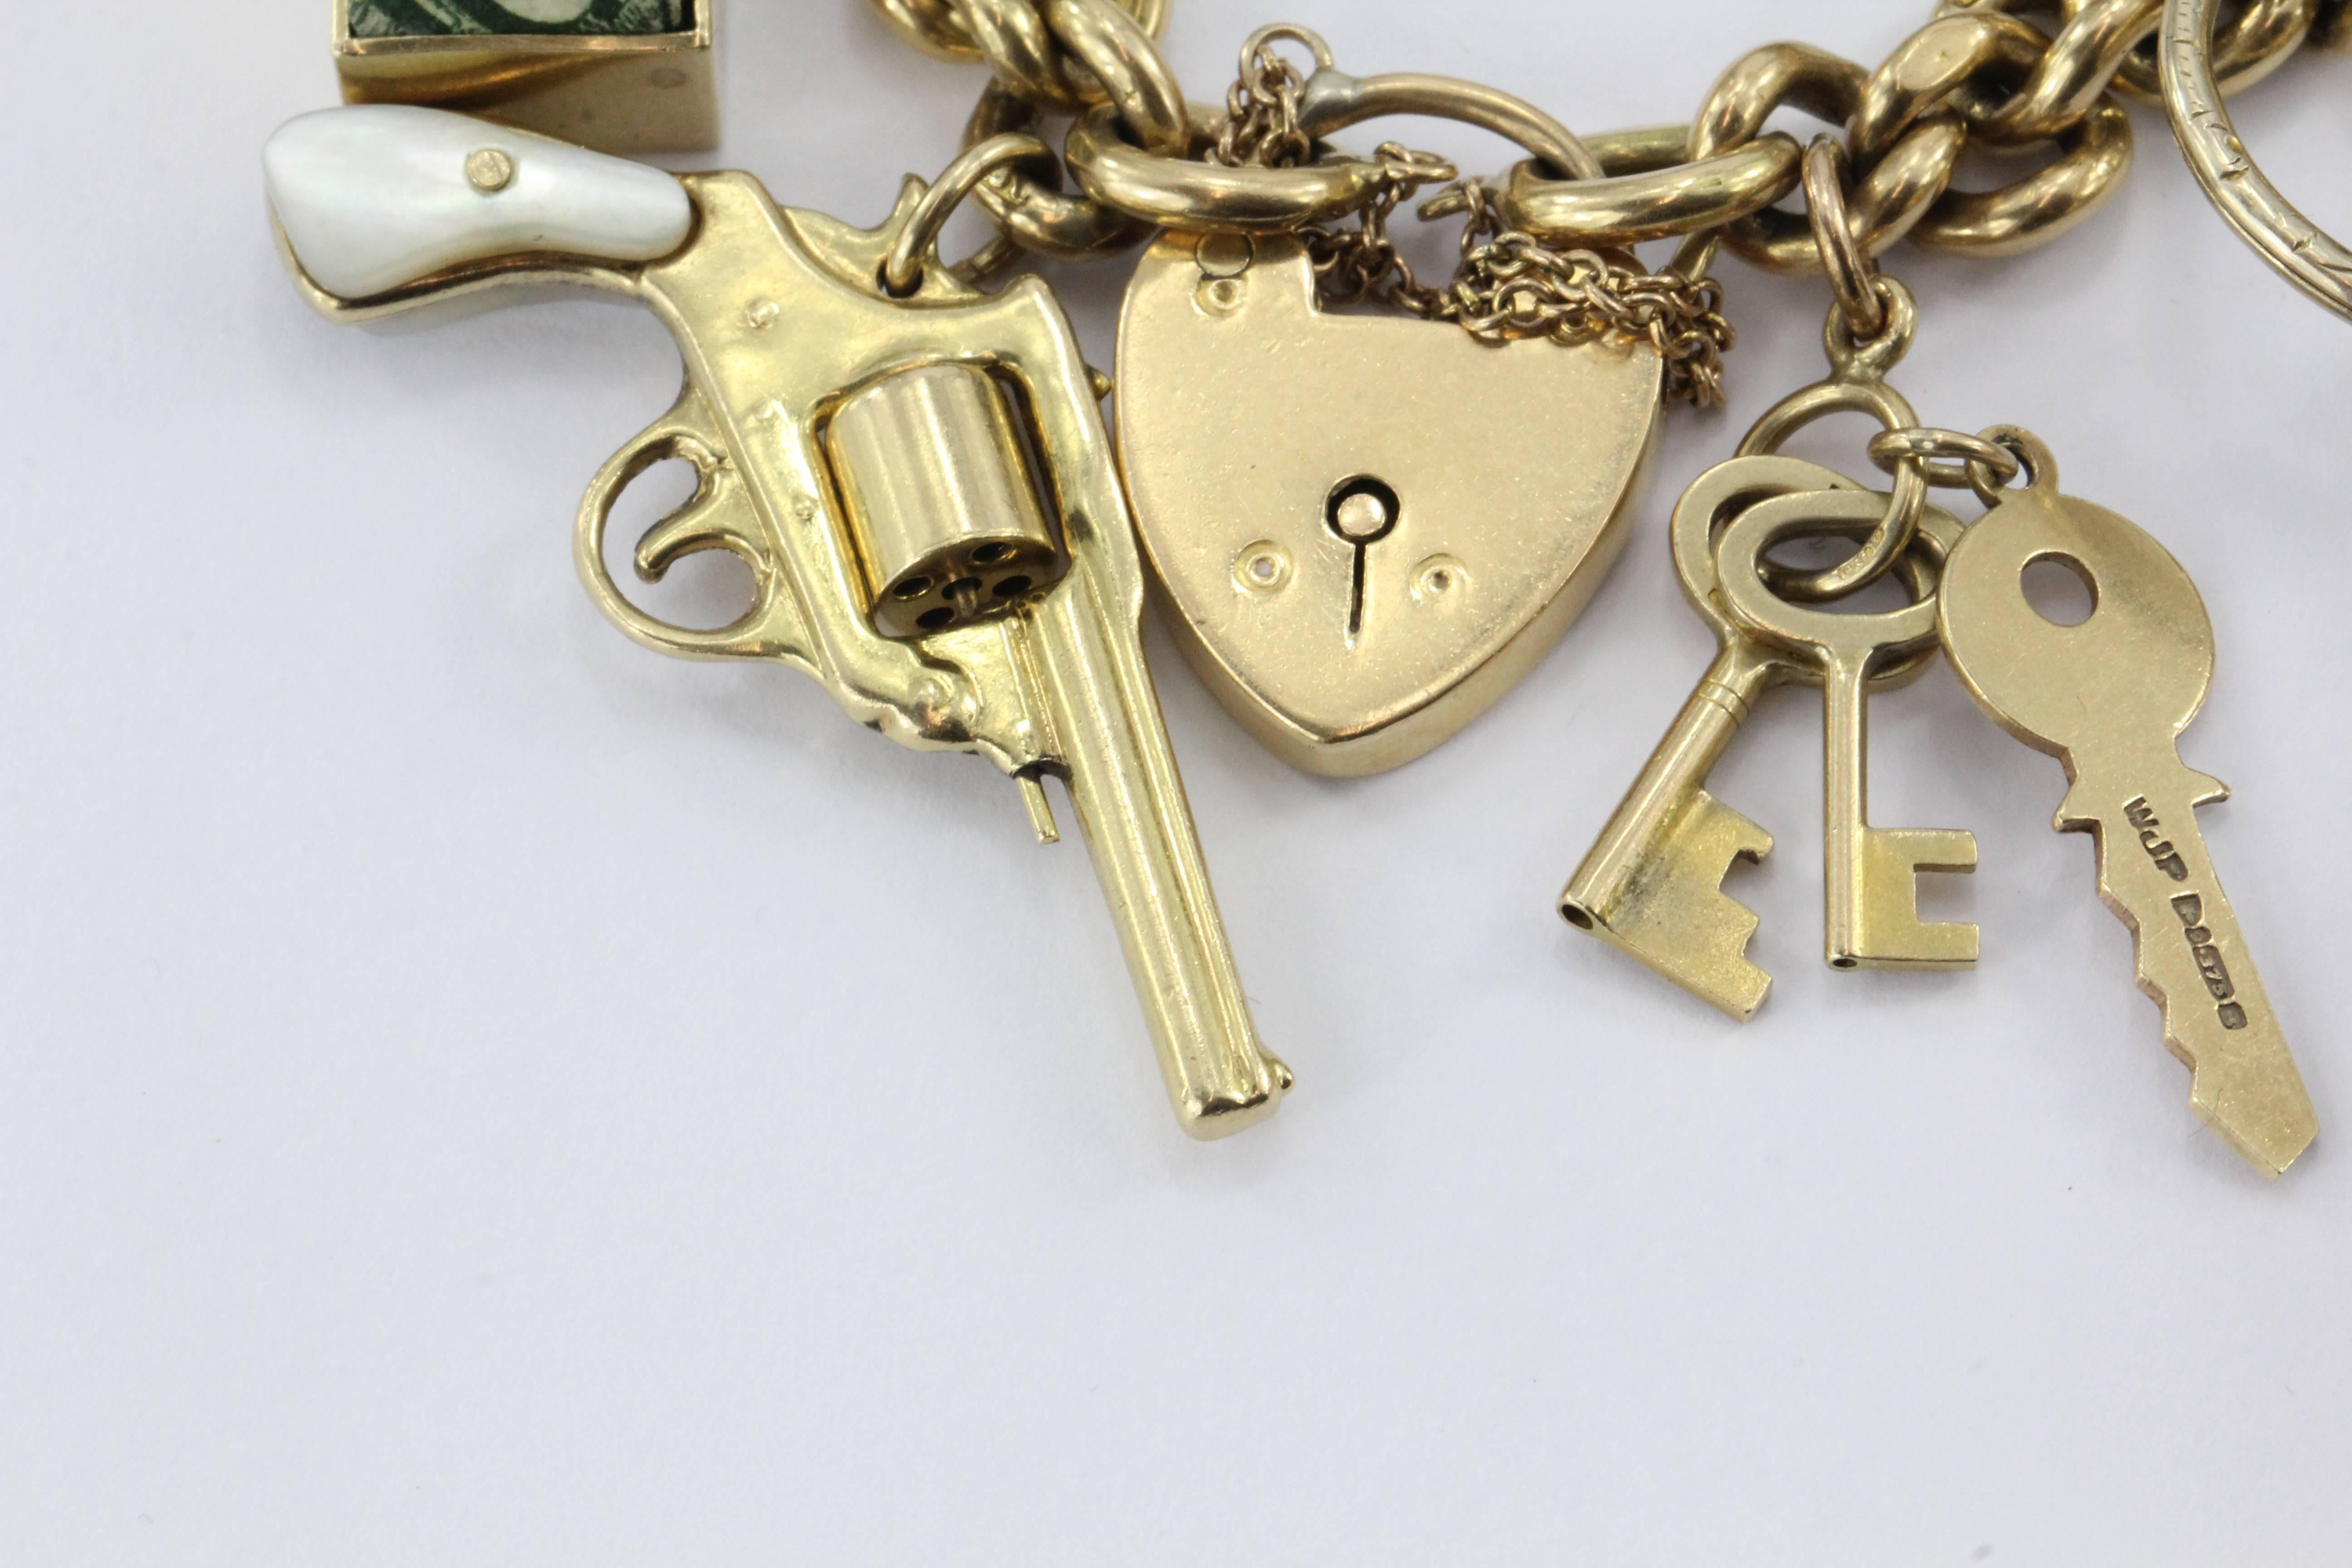 Antique 18K Gold English Tassie Seal heavy Loaded Charm Bracelet. The bracelet is in great estate condition and ready to wear. One of the charms is missing its glass. Every link on the bracelet is marked 18CT and the heart lock clasp is also marked